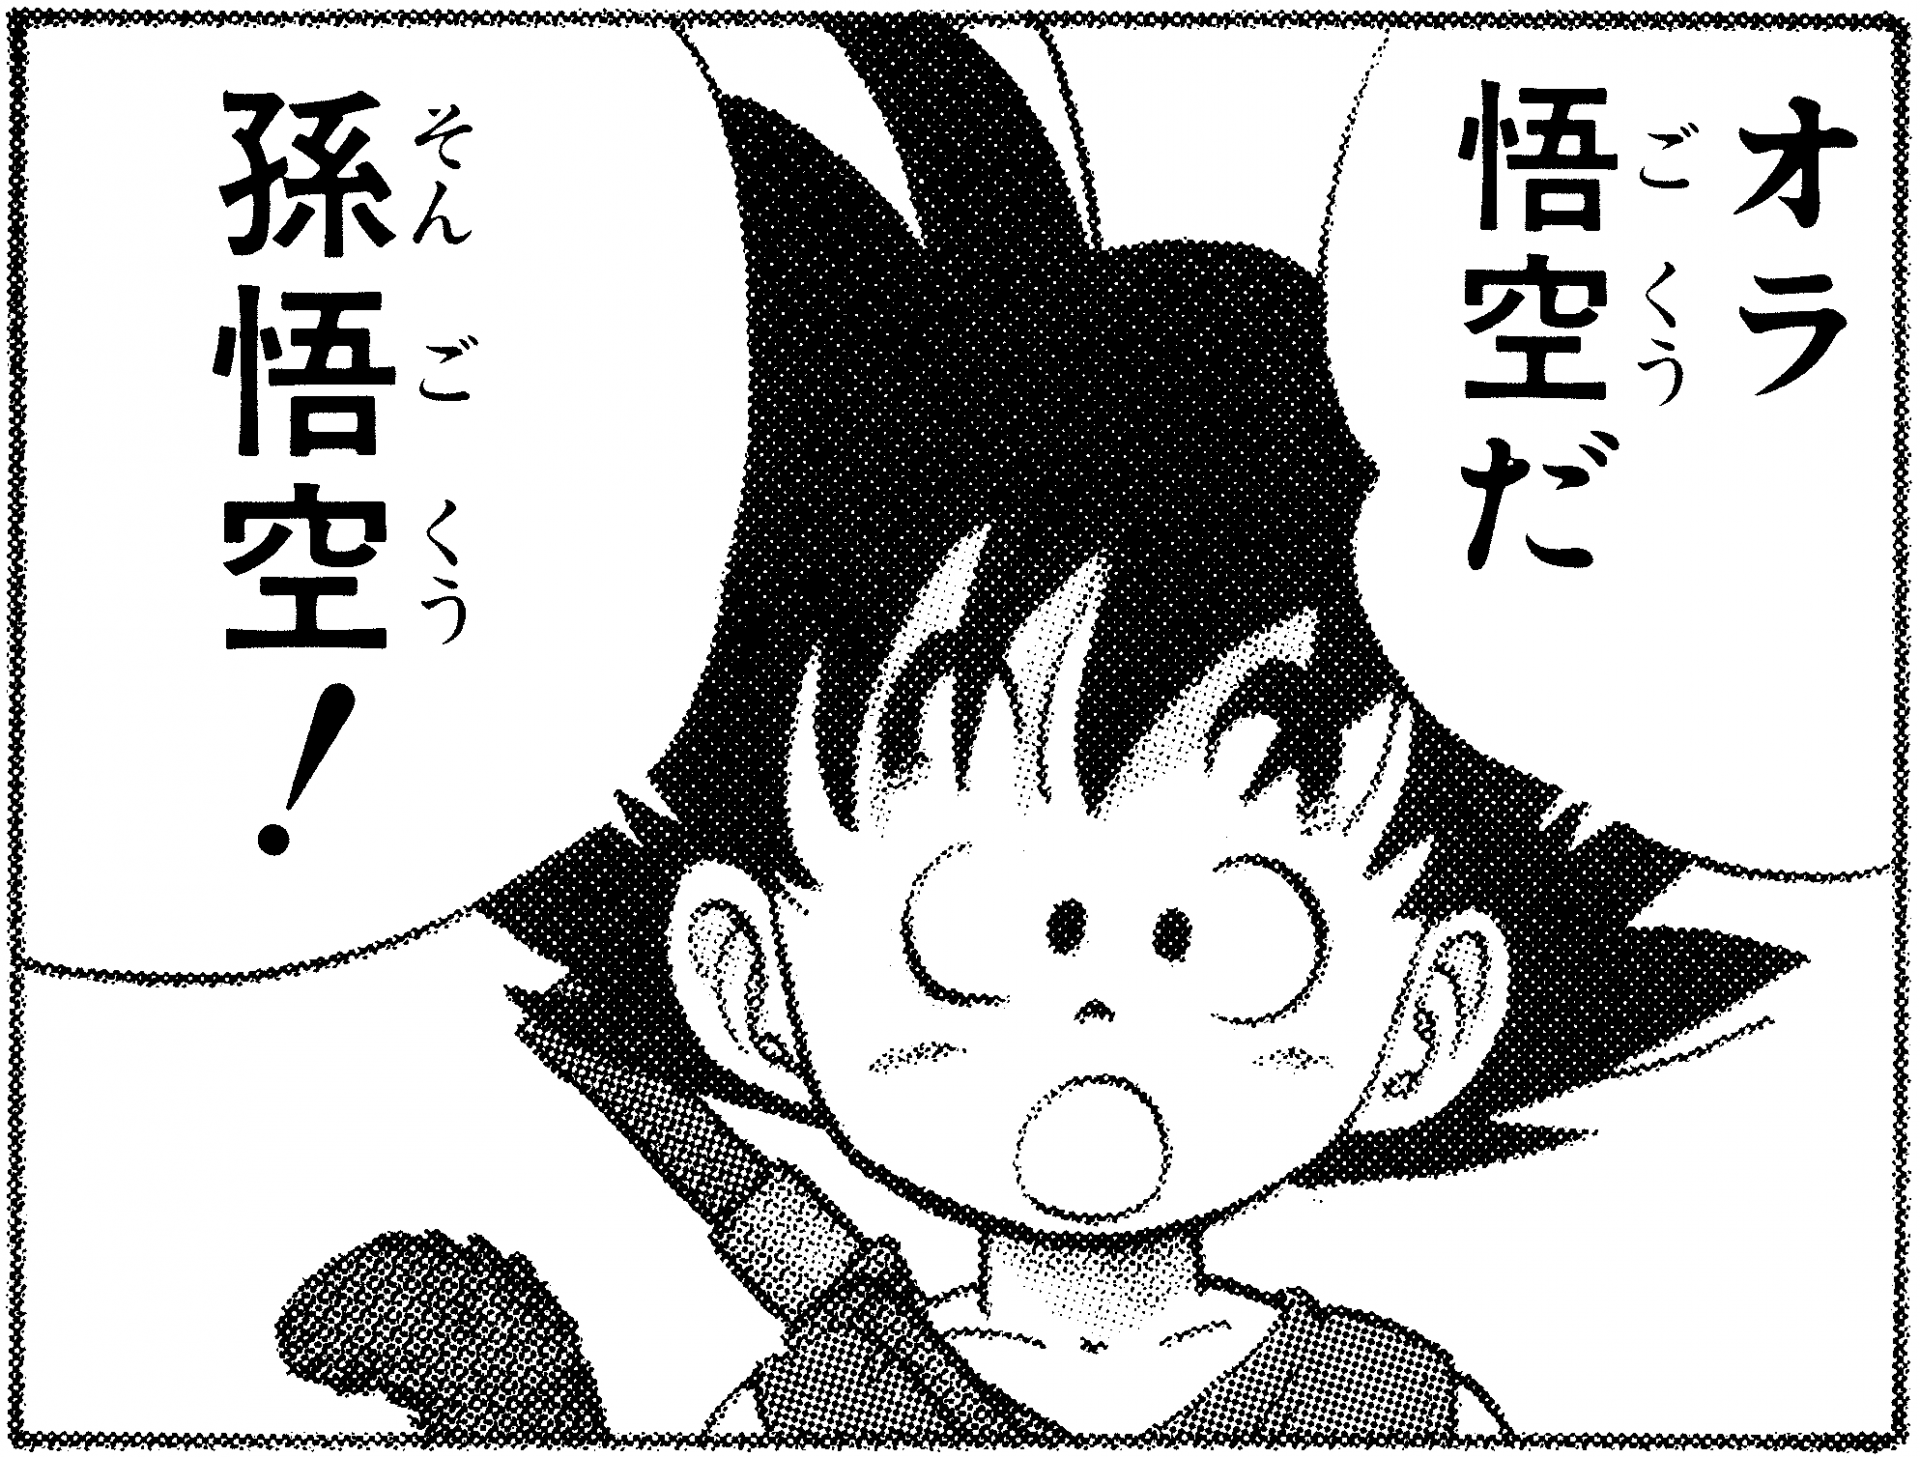 Dragon Ball': What Does Goku Mean in Japanese?